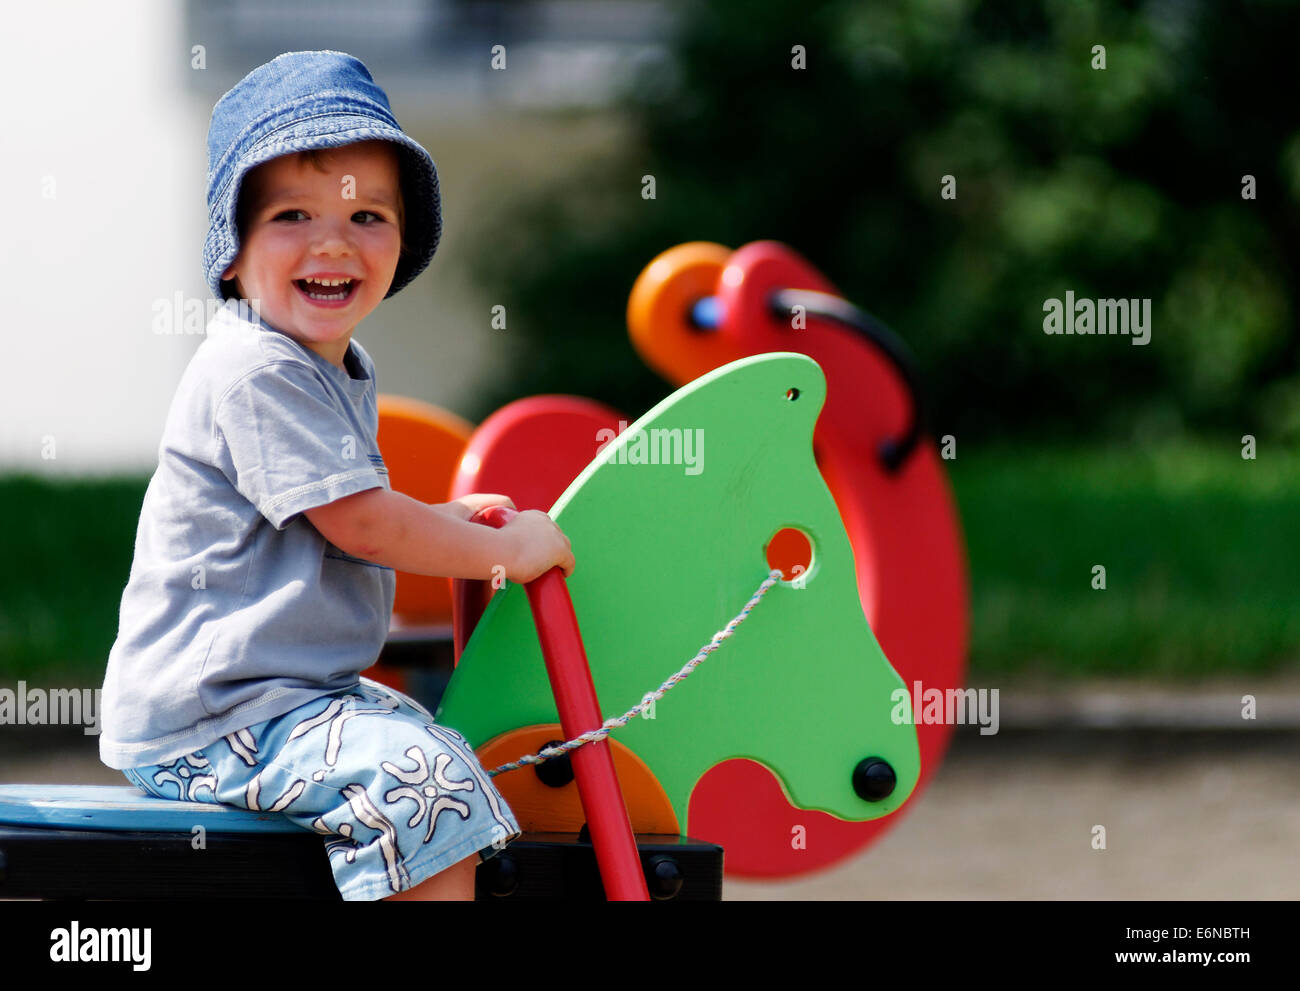 A smiling happy young boy playing in a playground Stock Photo